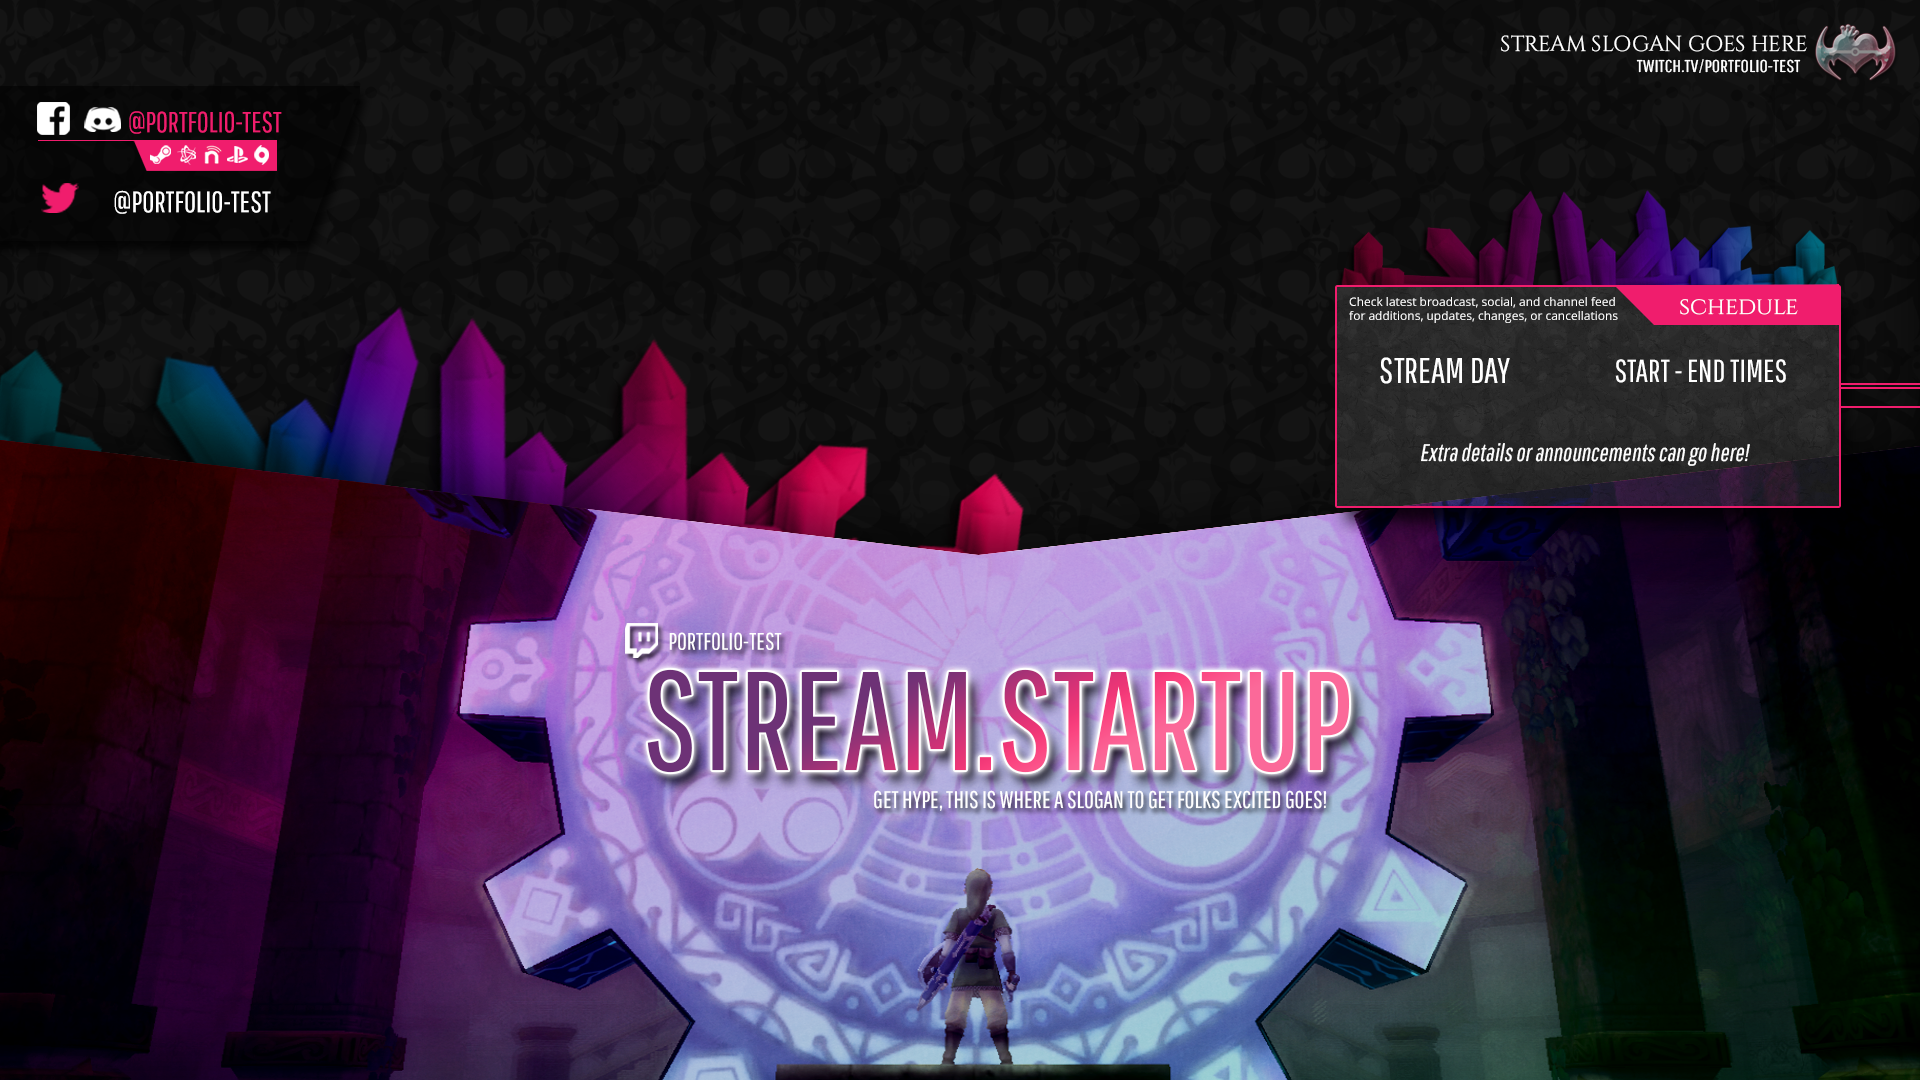 Graphic for a channel's stream to appear as the live video is starting up. The image is a deep charcoal with a heart baroque pattern behind it. Cut above this background with crystals jutting from the left side is an image from the game The Legend of Zelda Skyward Sword where Link stands in front of the Door of Time. The image is washed with a gradient of pink to teal to match the crystals. On the Door in the image, the text "Stream.Startup" is large, and underneath as a subheader it says "Get Hype, This is where a slogan to get folks excited goes!" In the upper right, a logo for the stream and the text "Stream Slogan Goes Here" appears alongside a direct link. On the left, a minimal banner shows various social media information. In the middle right, a box floats with a crystal cluster above it that shows scheduling information.